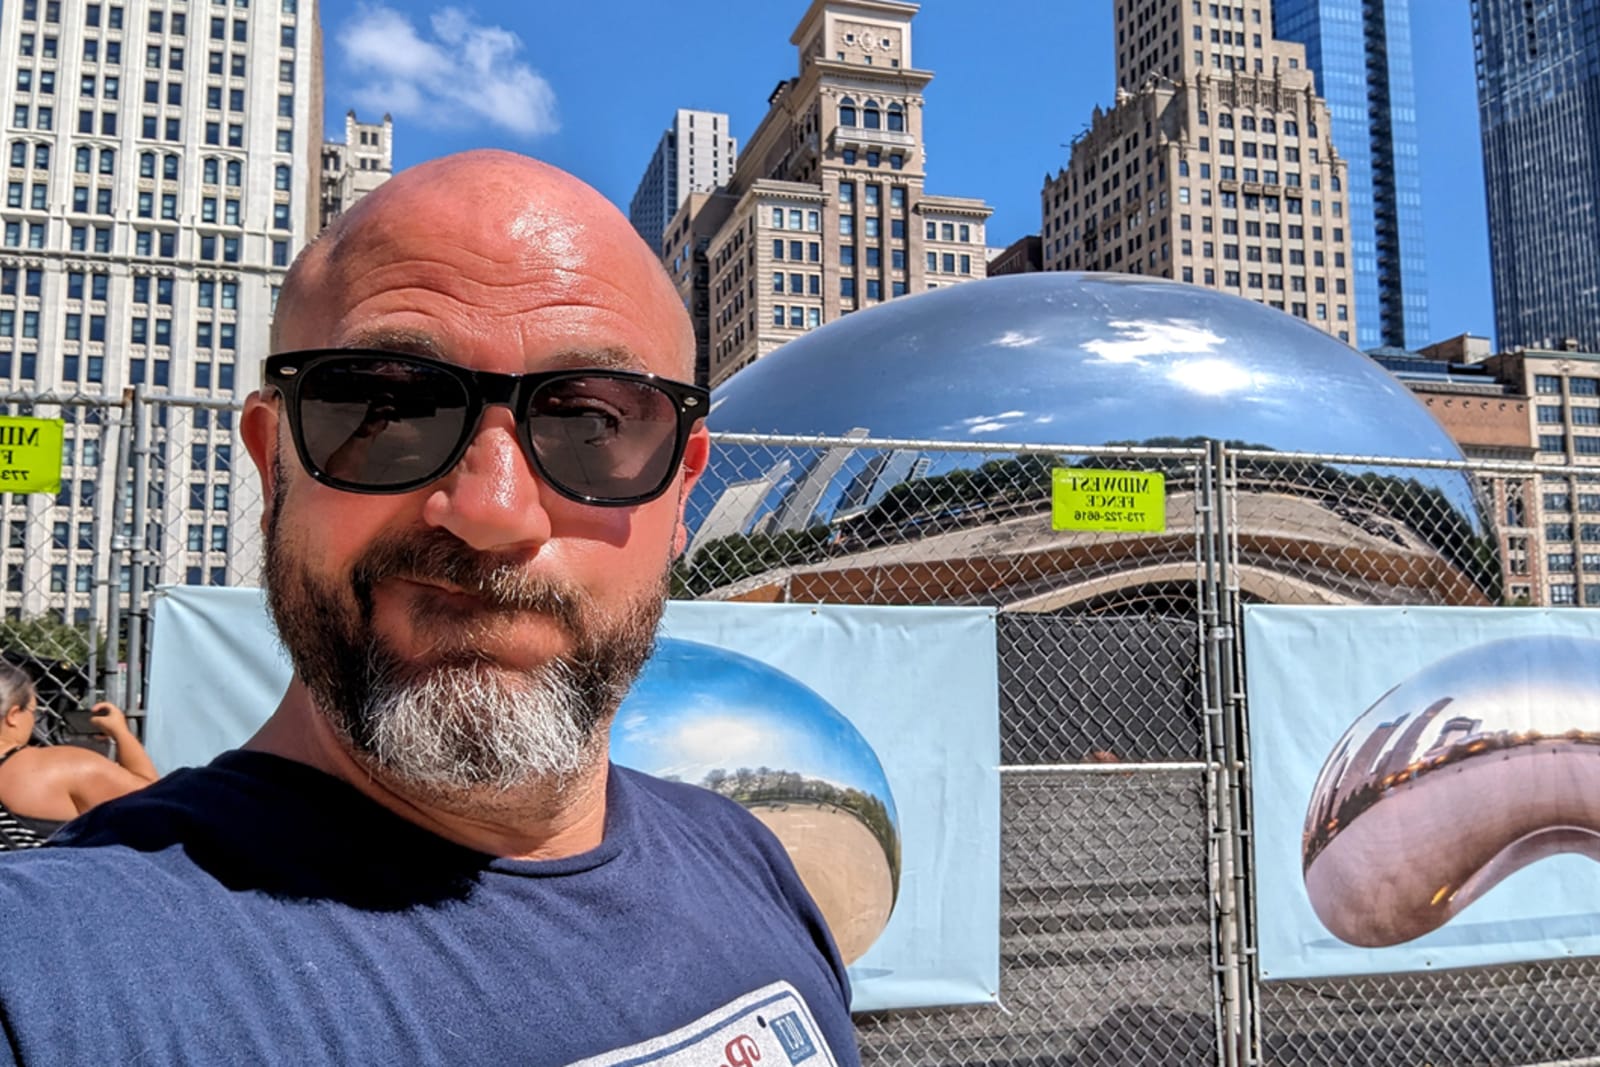 Flight Centre travel consultant Omar Guechtal poses for a selfie in front of "The Bean" in Chicago